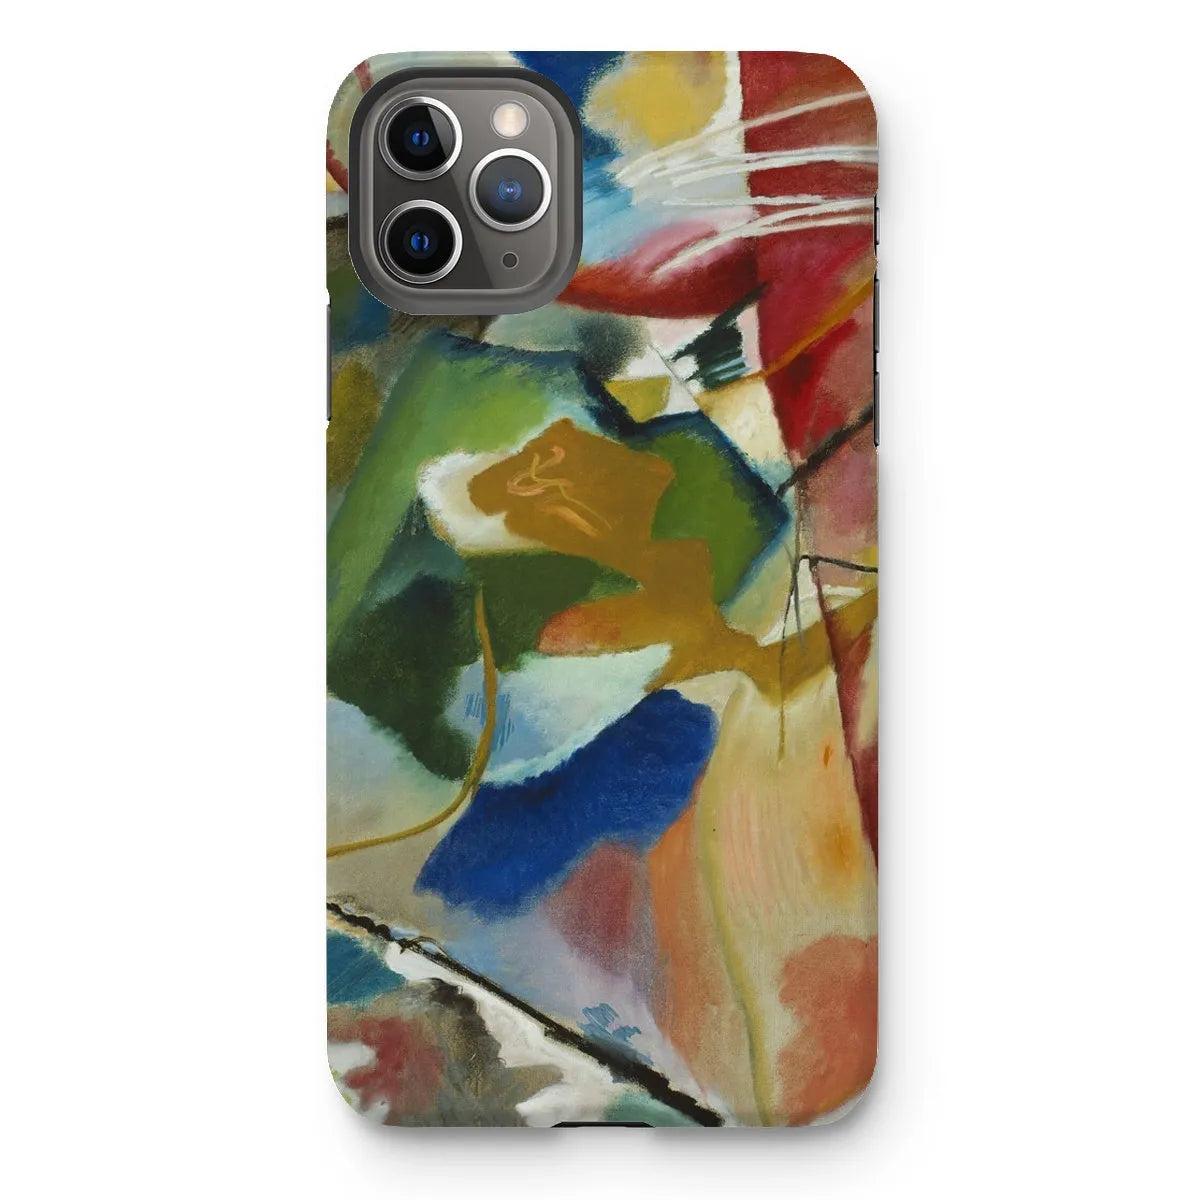 Painting With Green Center Art Phone Case - Wassily Kandinsky - Iphone 11 Pro Max / Matte - Mobile Phone Cases